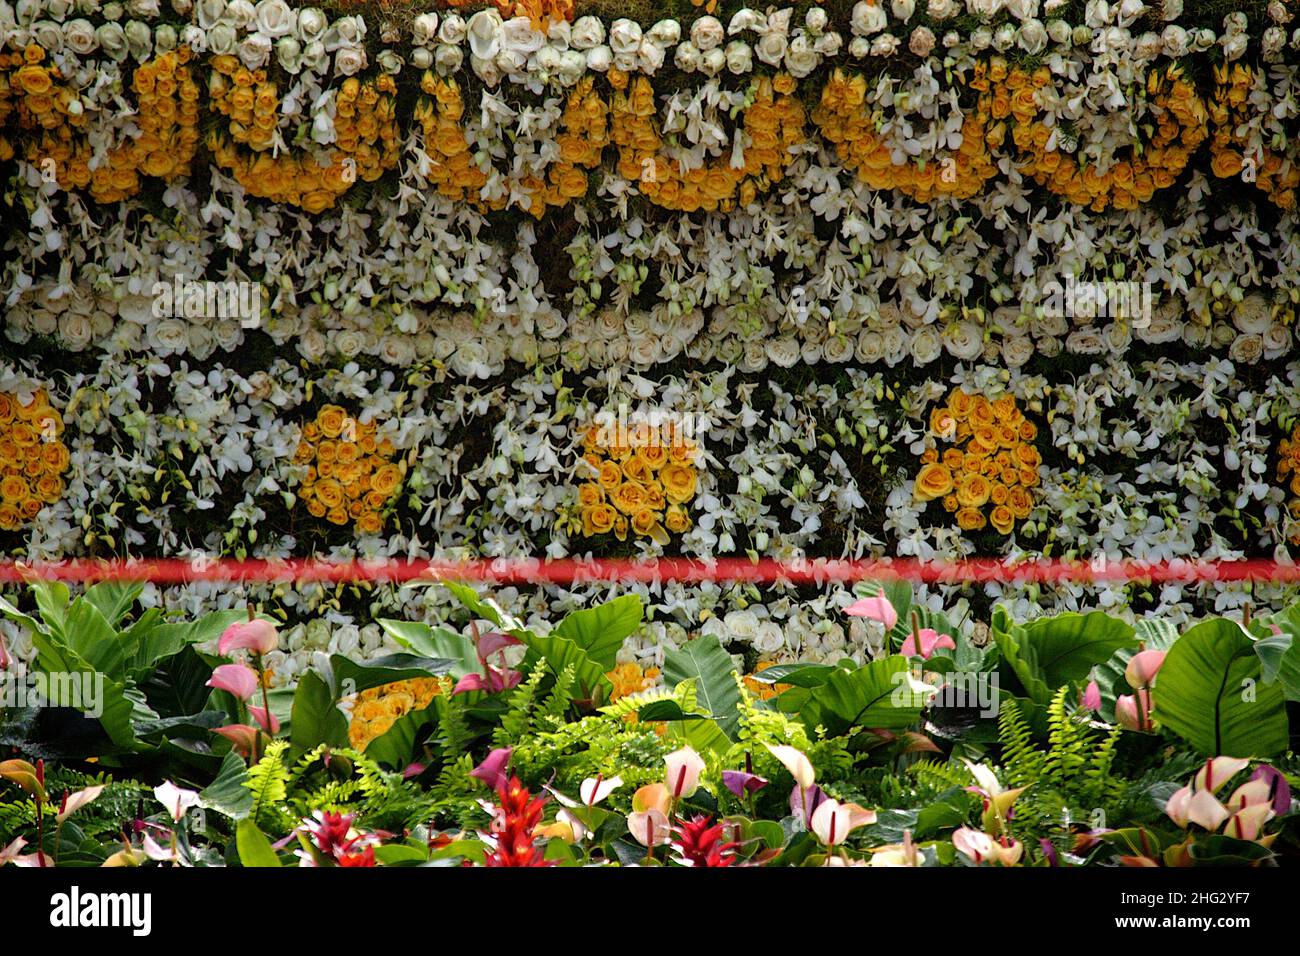 Variety of flowers and plants used for decoration at Republic Day Flower Show, Lalbagh, Bengaluru, Karnataka, India, Asia Stock Photo